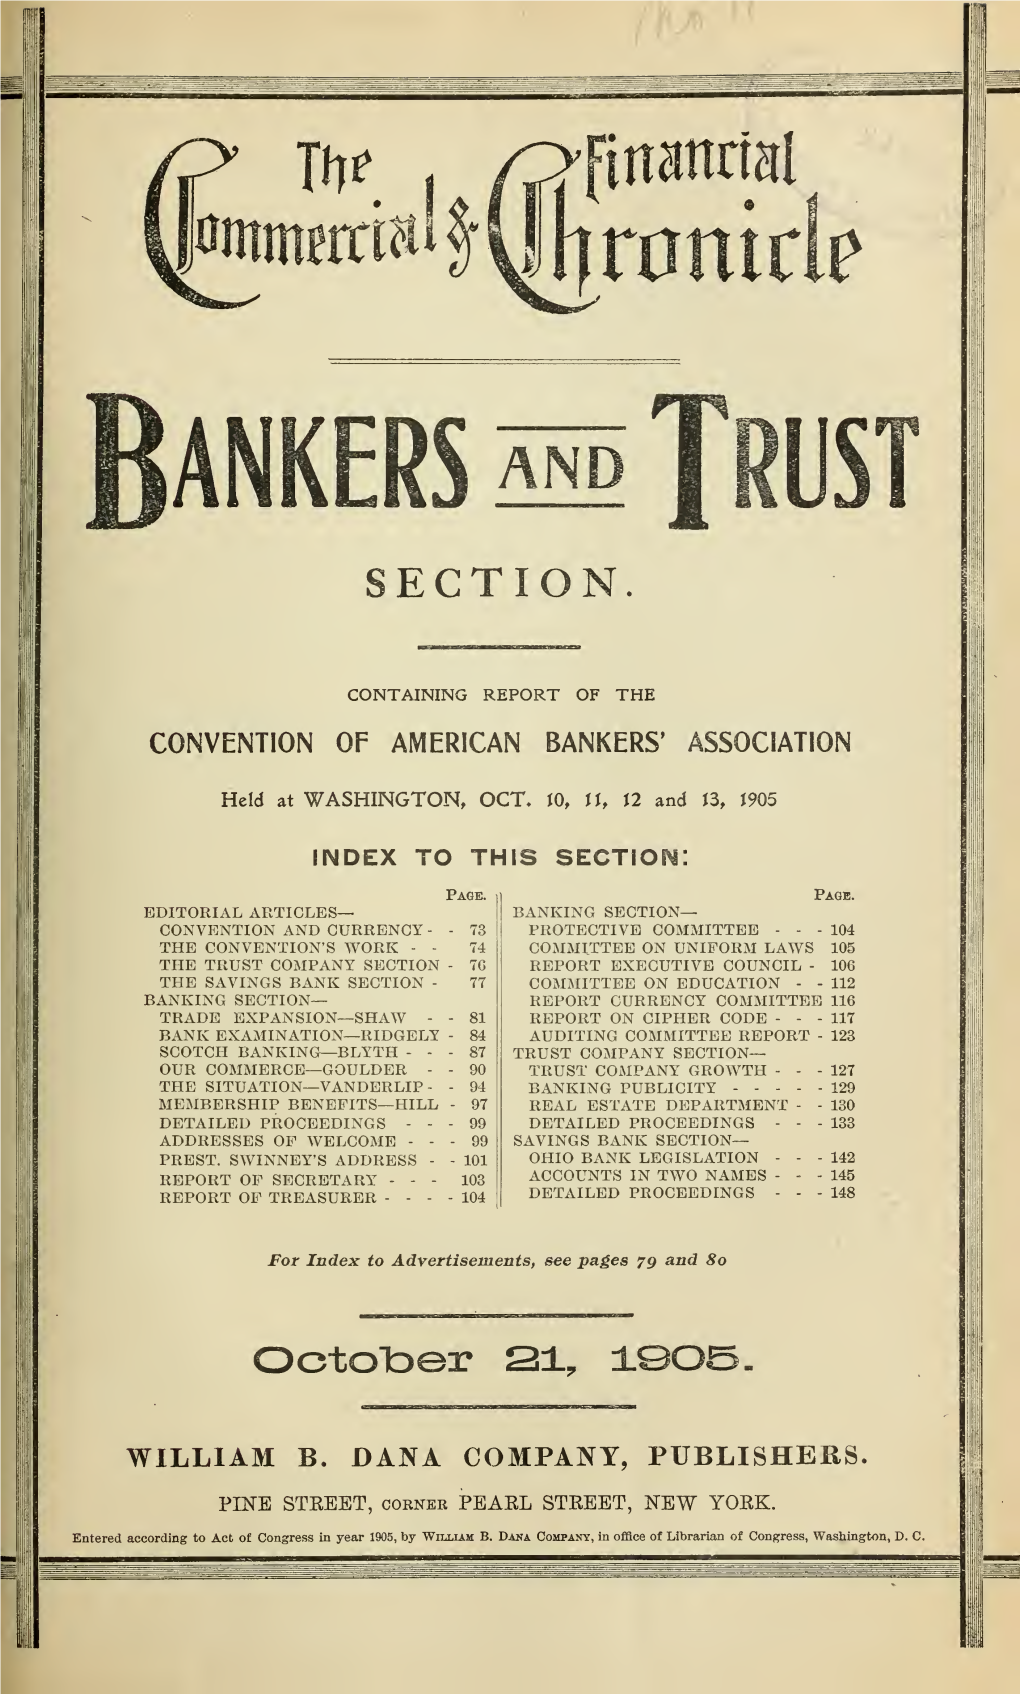 Bankers and Trust Section, Vol. 81, No. 2104